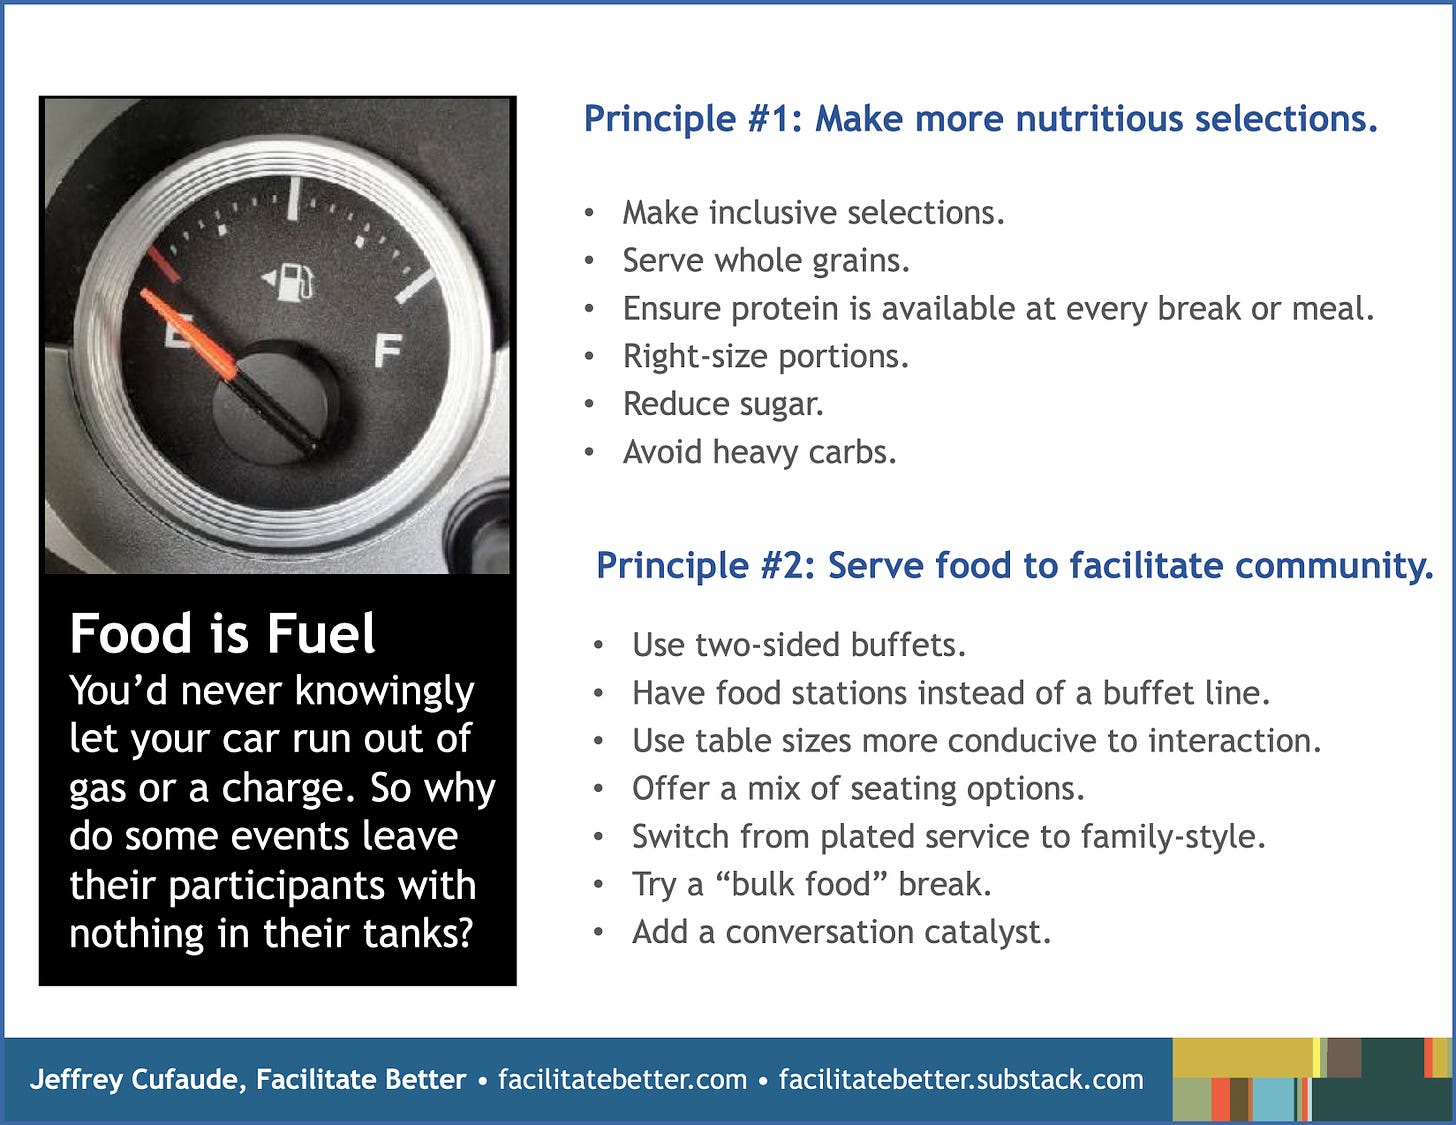 Image of a car fuel gauge on empty alongside this text: Principle #1: Make more nutritious selections.  Make inclusive selections. Serve whole grains.   Ensure protein is available at every break or meal. Right-size portions. Reduce sugar. Avoid heavy carbs. Principle #2: Serve food to facilitate community. Use two-sided buffets. Have food stations instead of a buffet line. Use table sizes more conducive to interaction. Offer a mix of seating options. Switch from plated service to family-style. Try a “bulk food” break. Add a conversation catalyst.